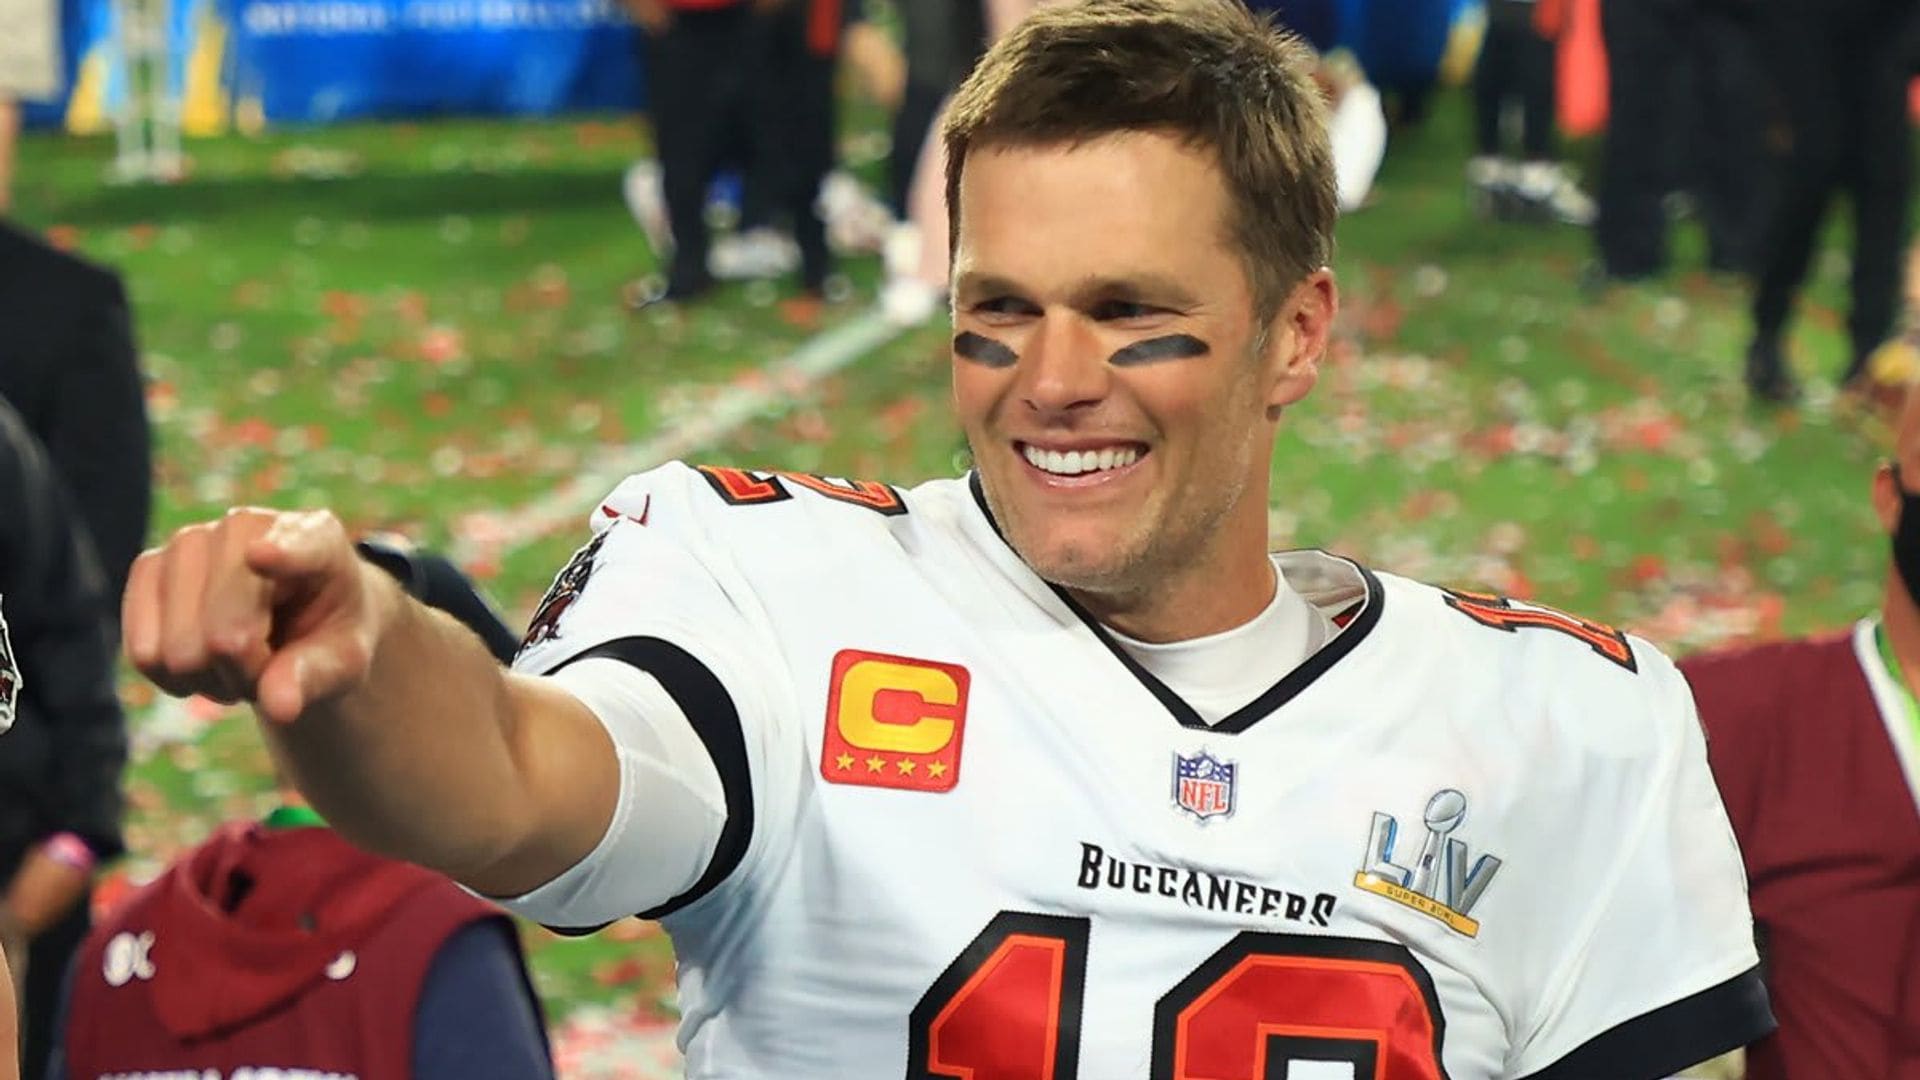 Tom Brady surprises young cancer survivor with Super Bowl tickets